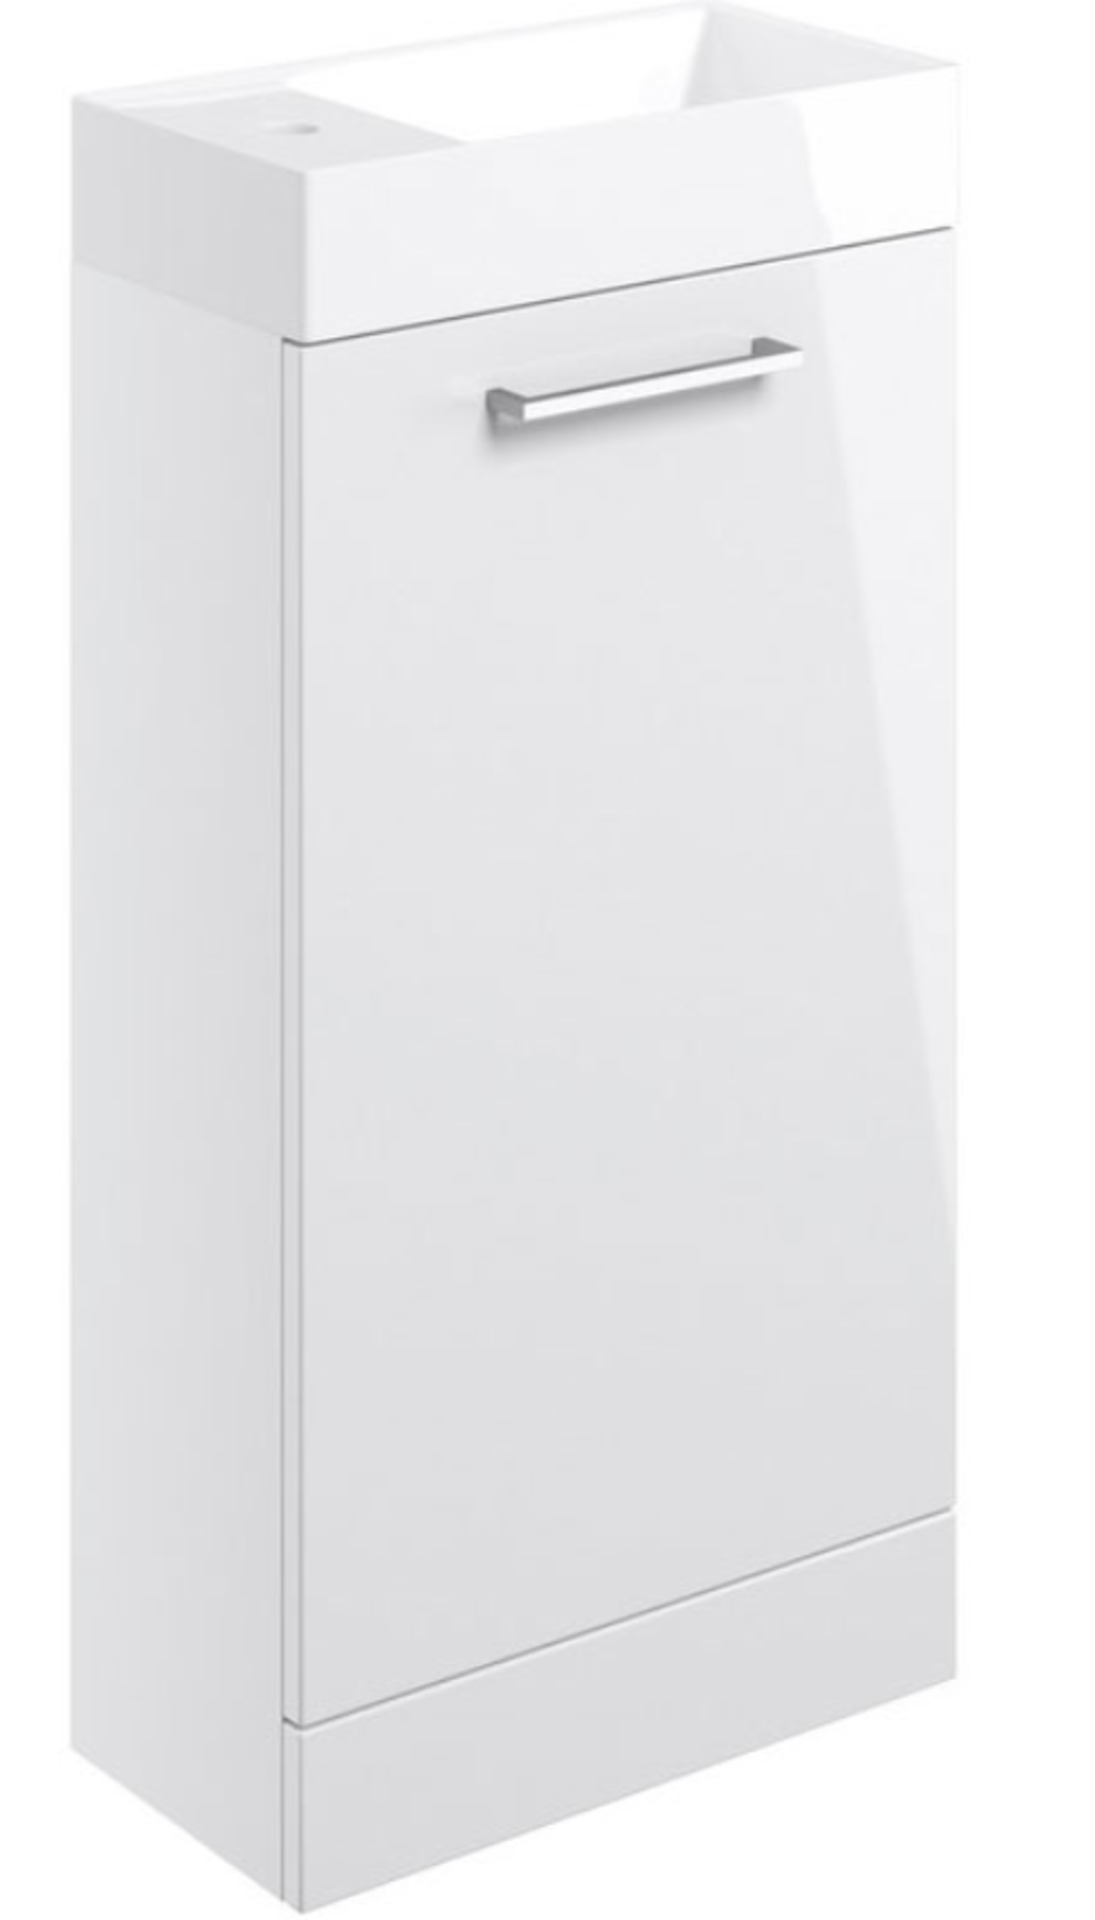 (EE21) New Volta White Gloss 400 Floor Standing Unit and Basin DIFTP2098. 410 x 830 x 220mm (